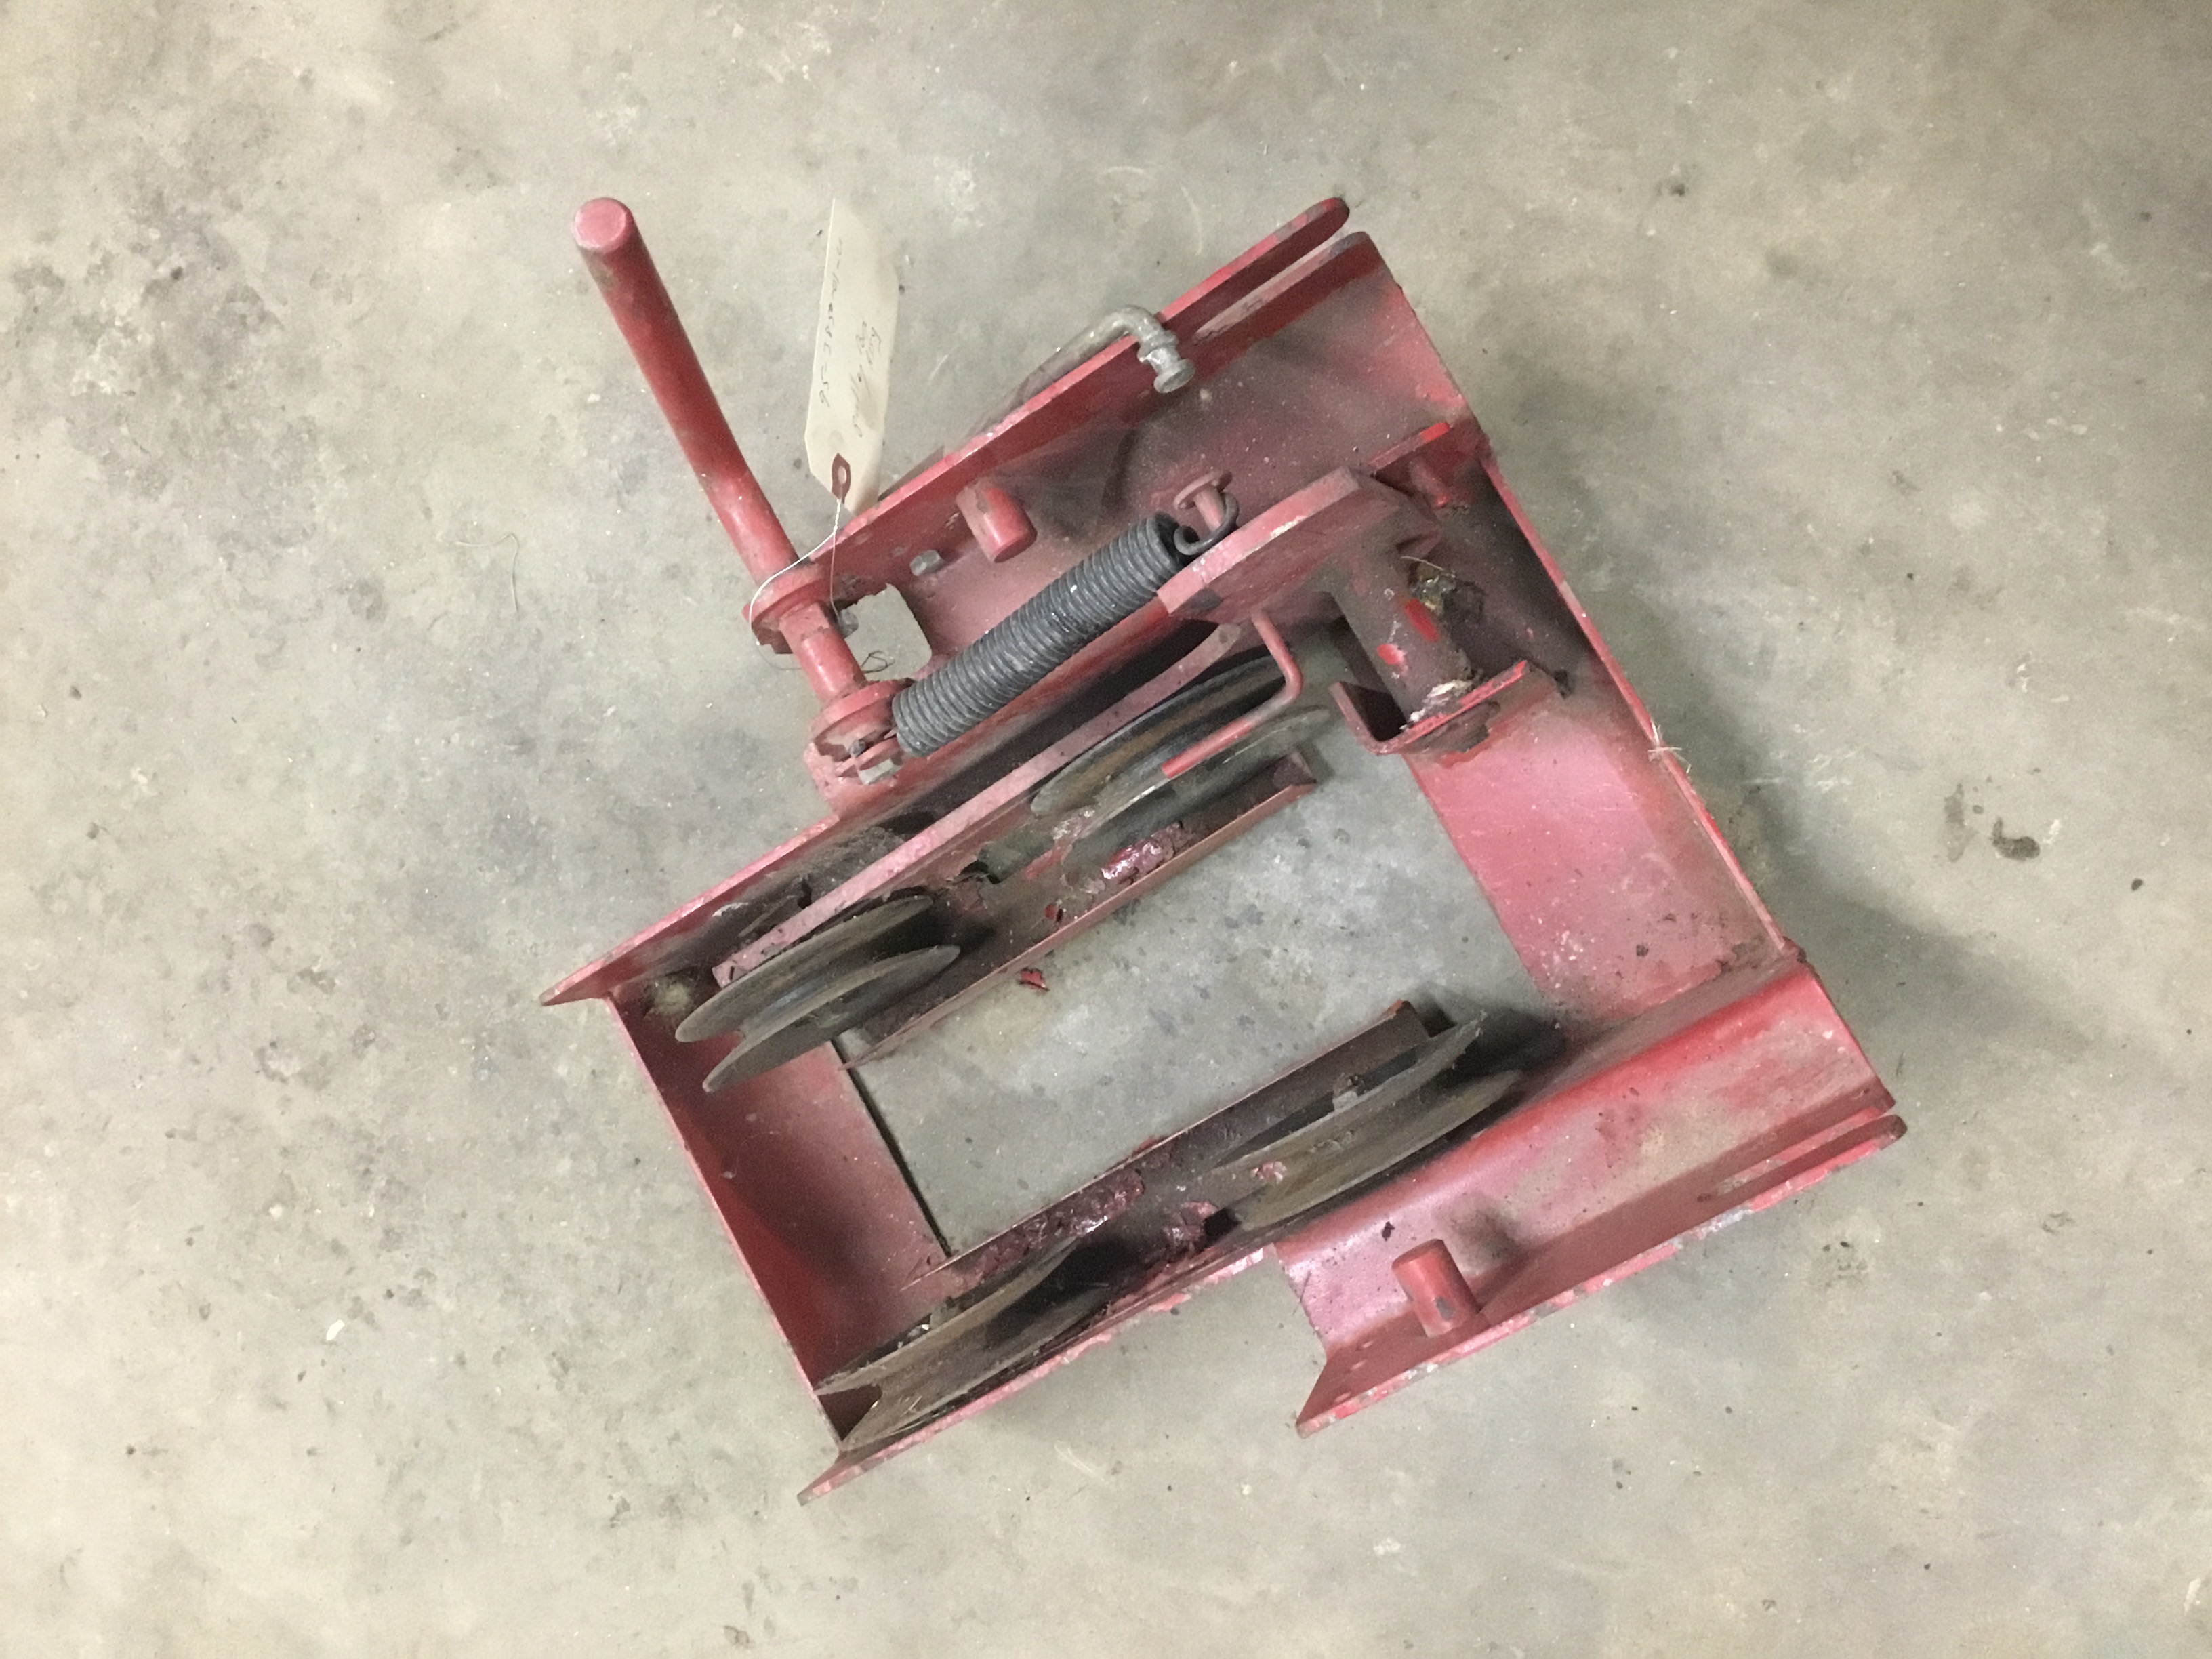 Pulley box for xi snowblower